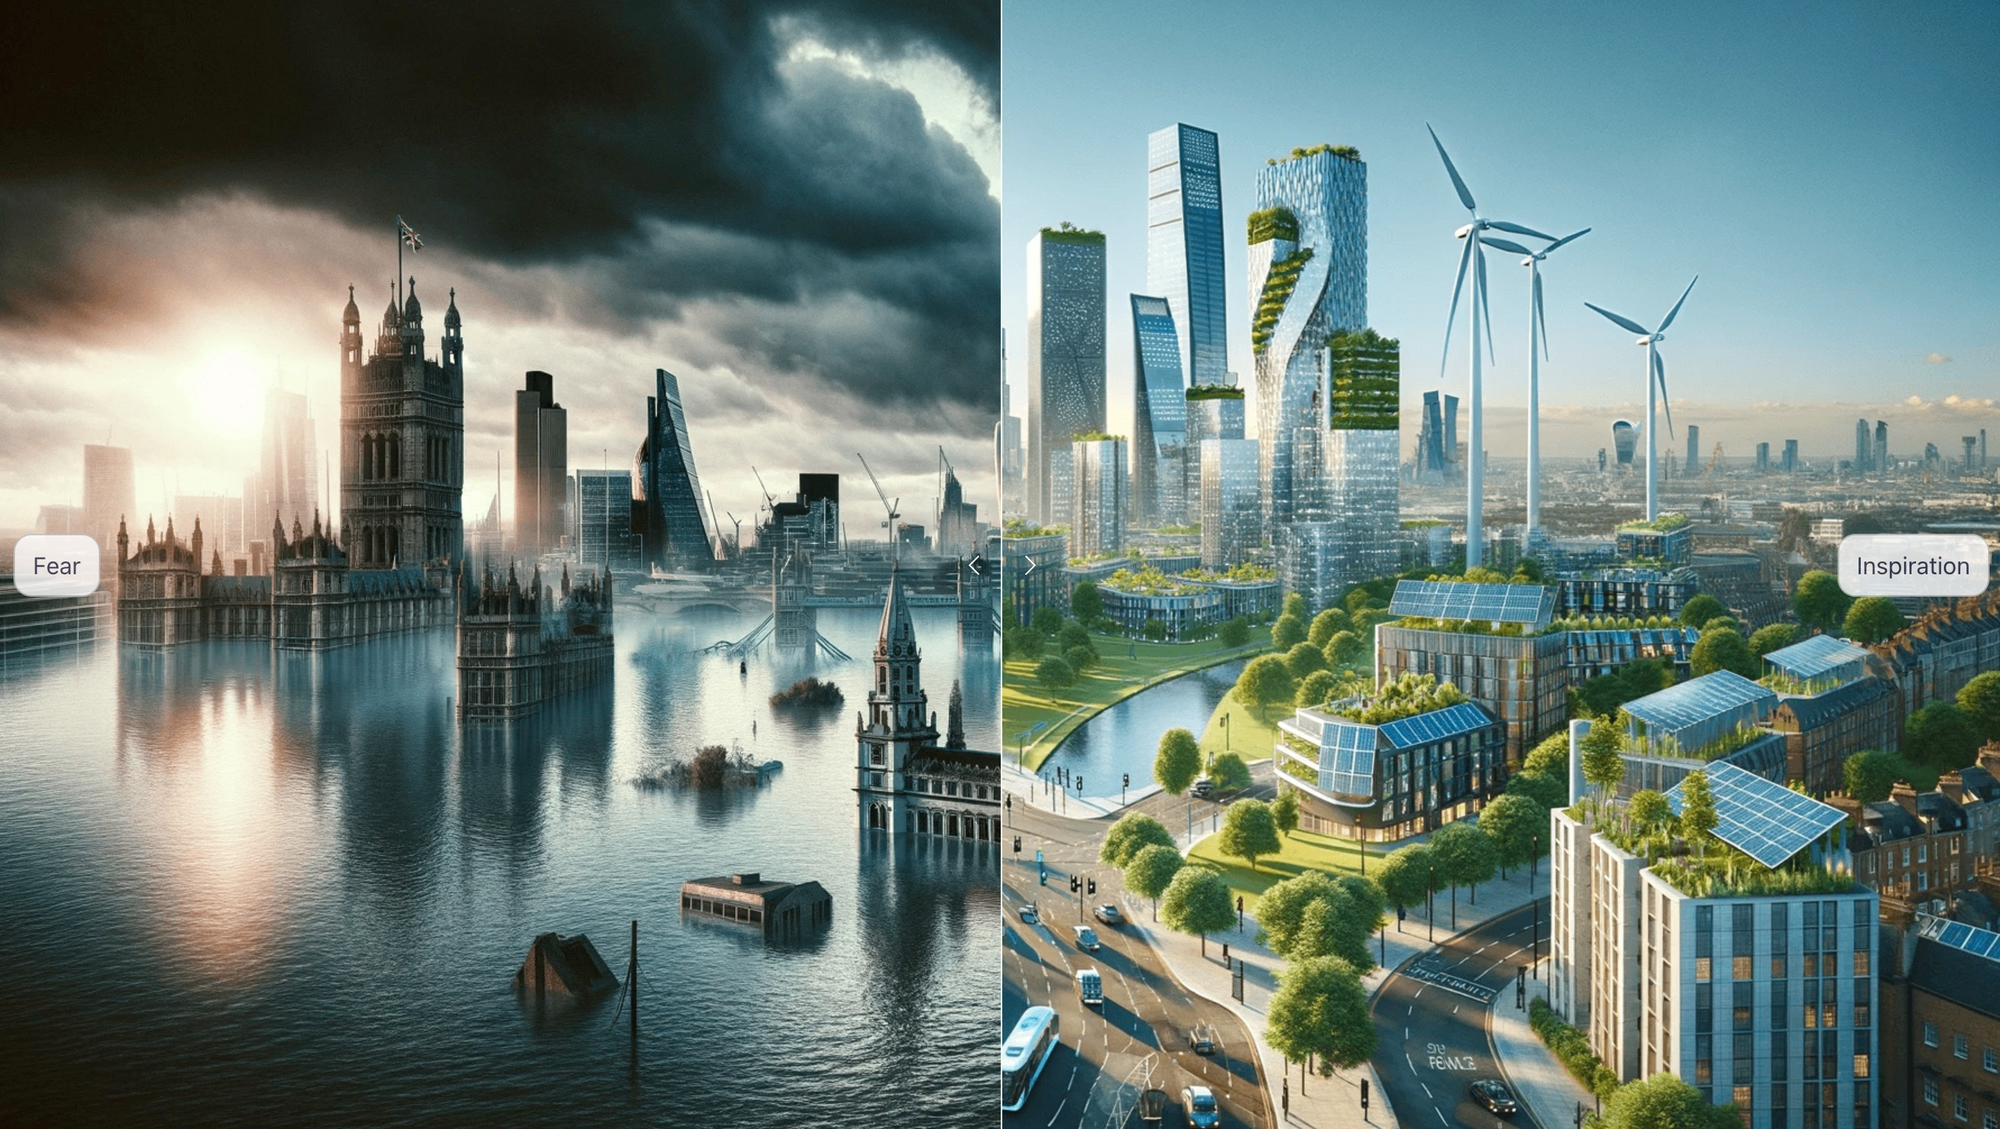 City 2047: Fear or Inspiration